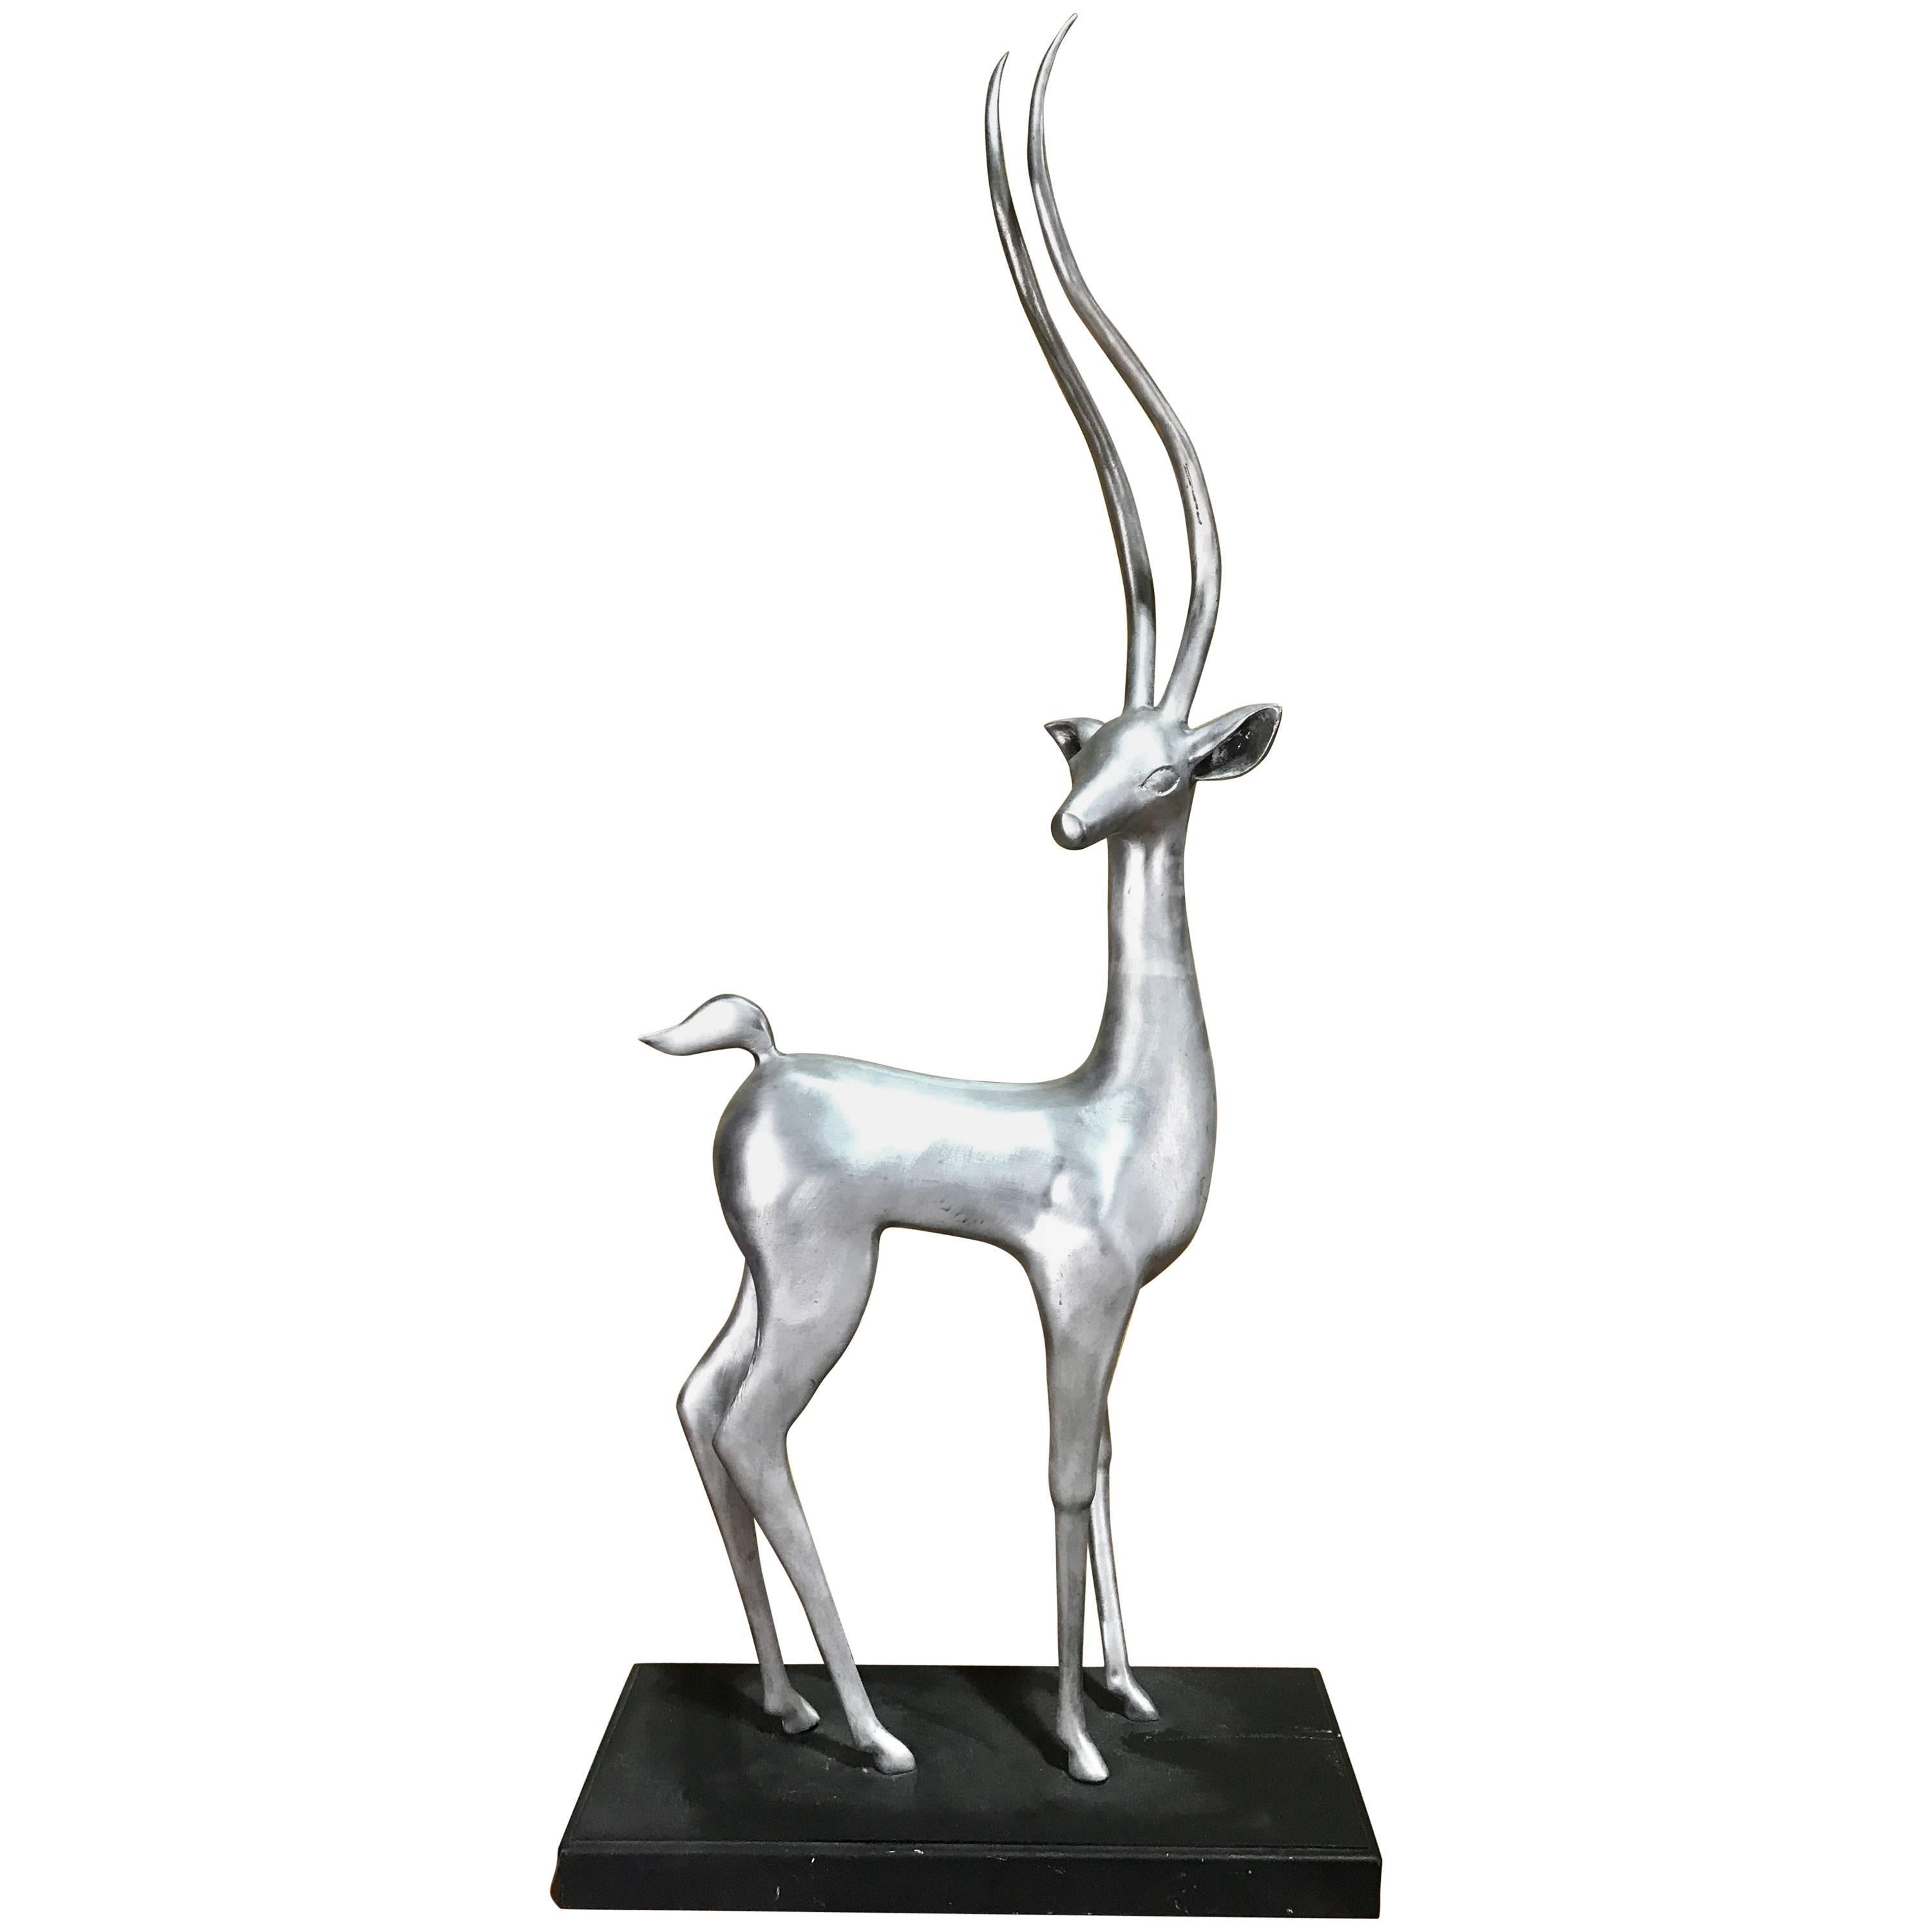 Large French Modern Sculpture of an Impala